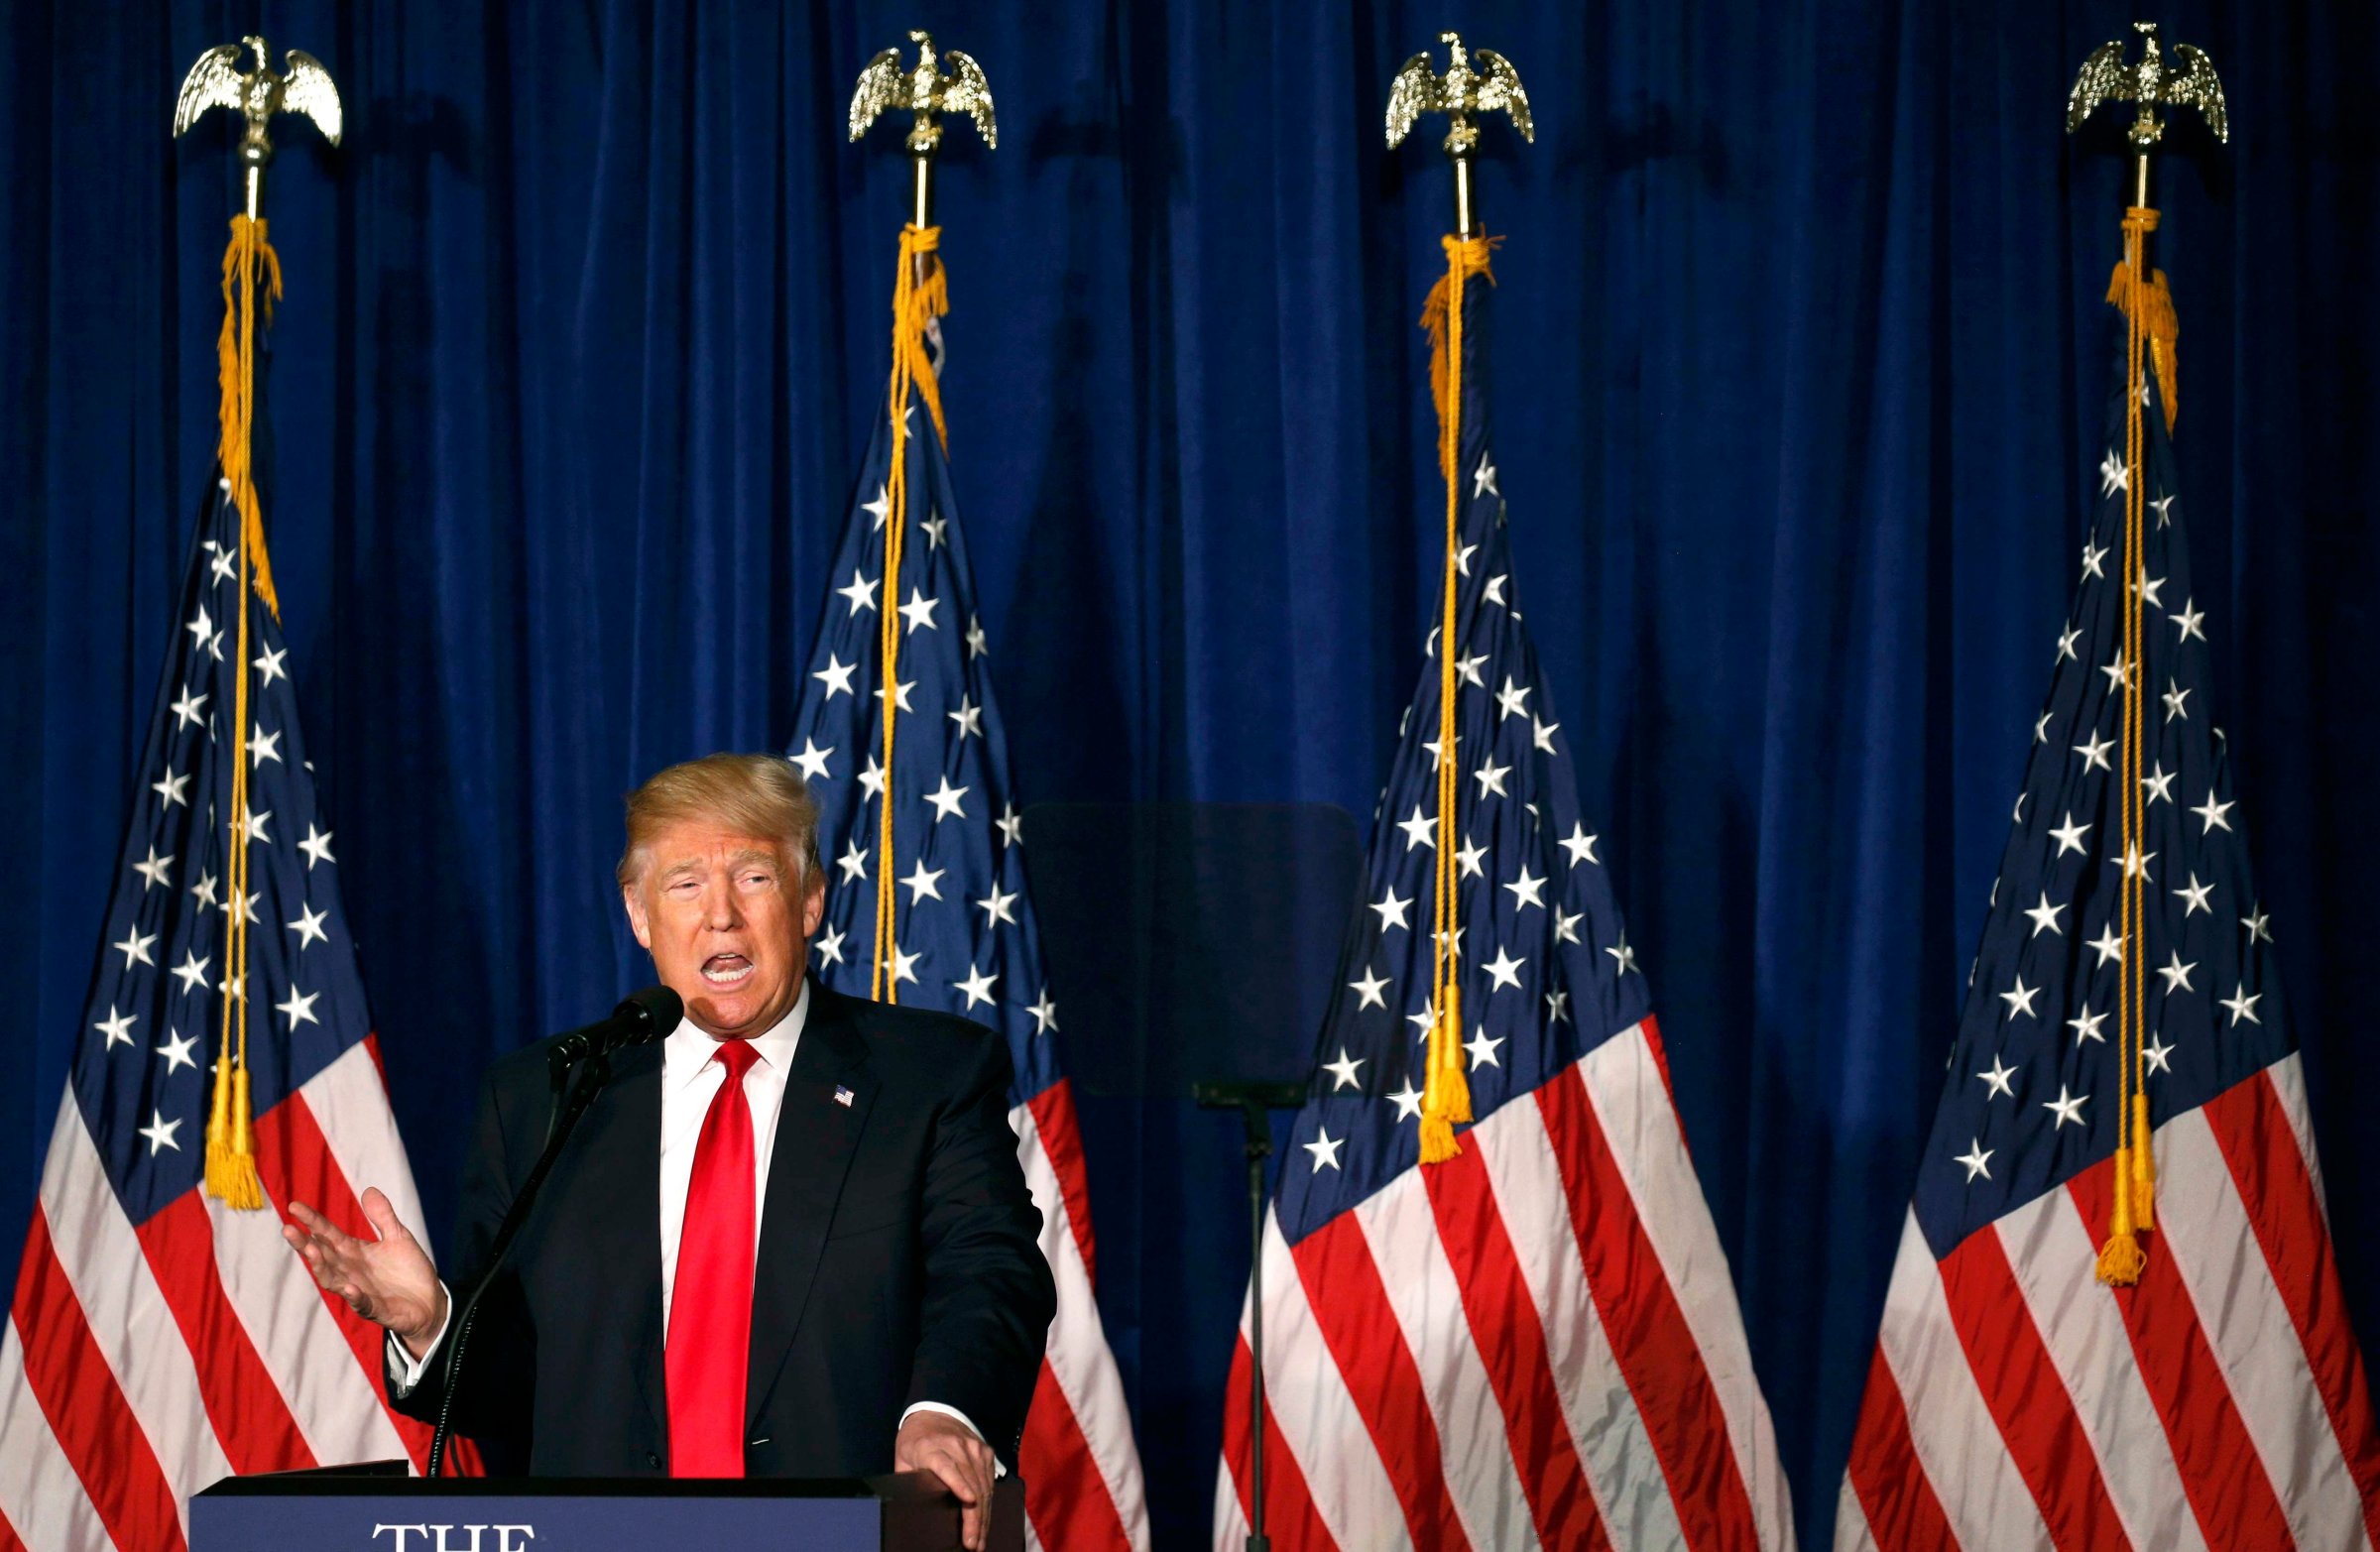 Republican U.S. presidential candidate Donald Trump delivers foreign policy speech at the Mayflower Hotel in Washington